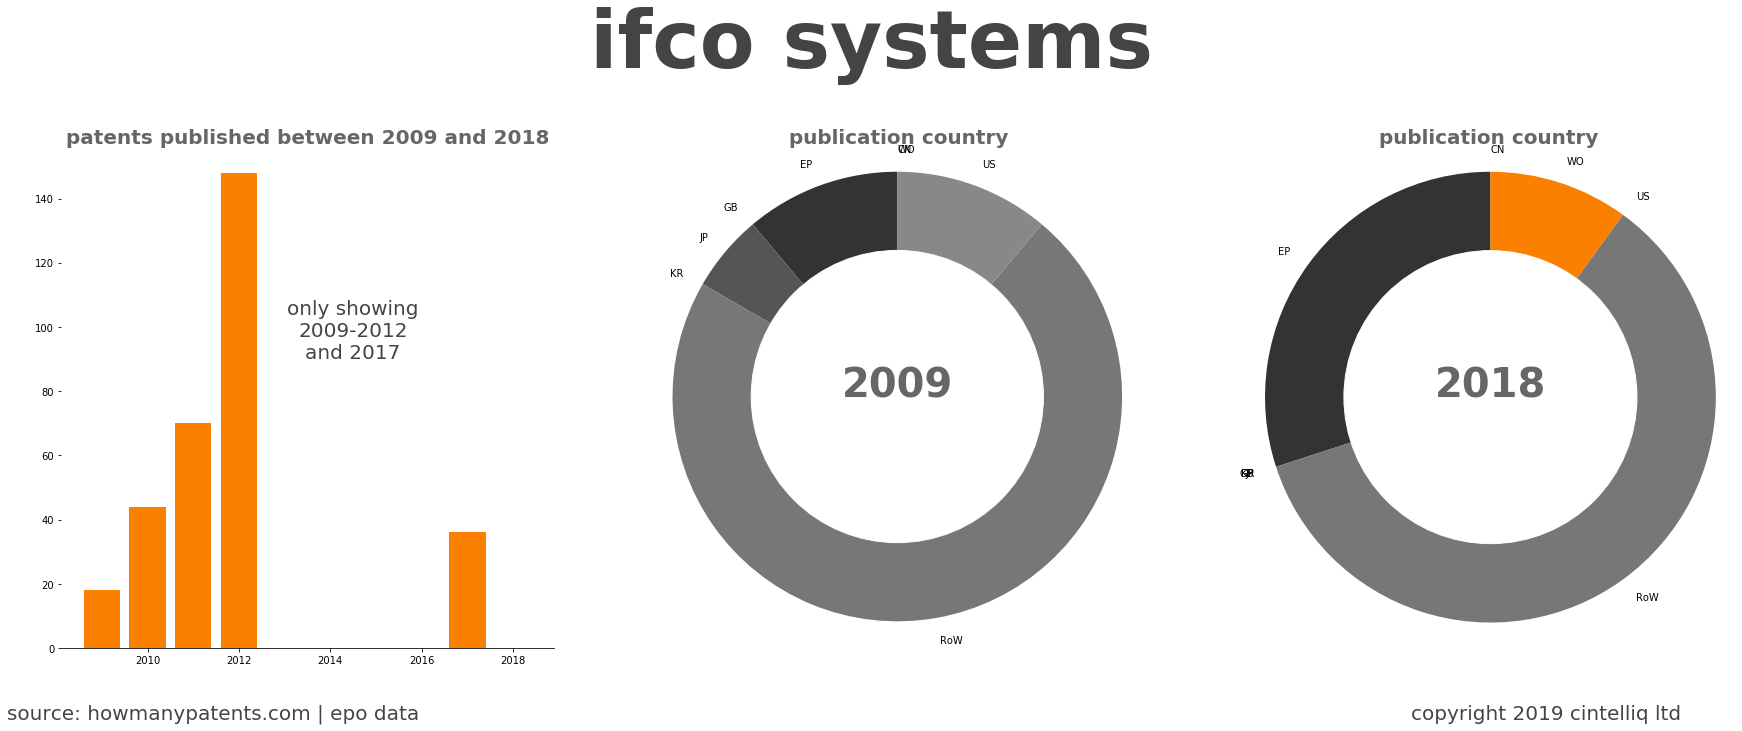 summary of patents for Ifco Systems